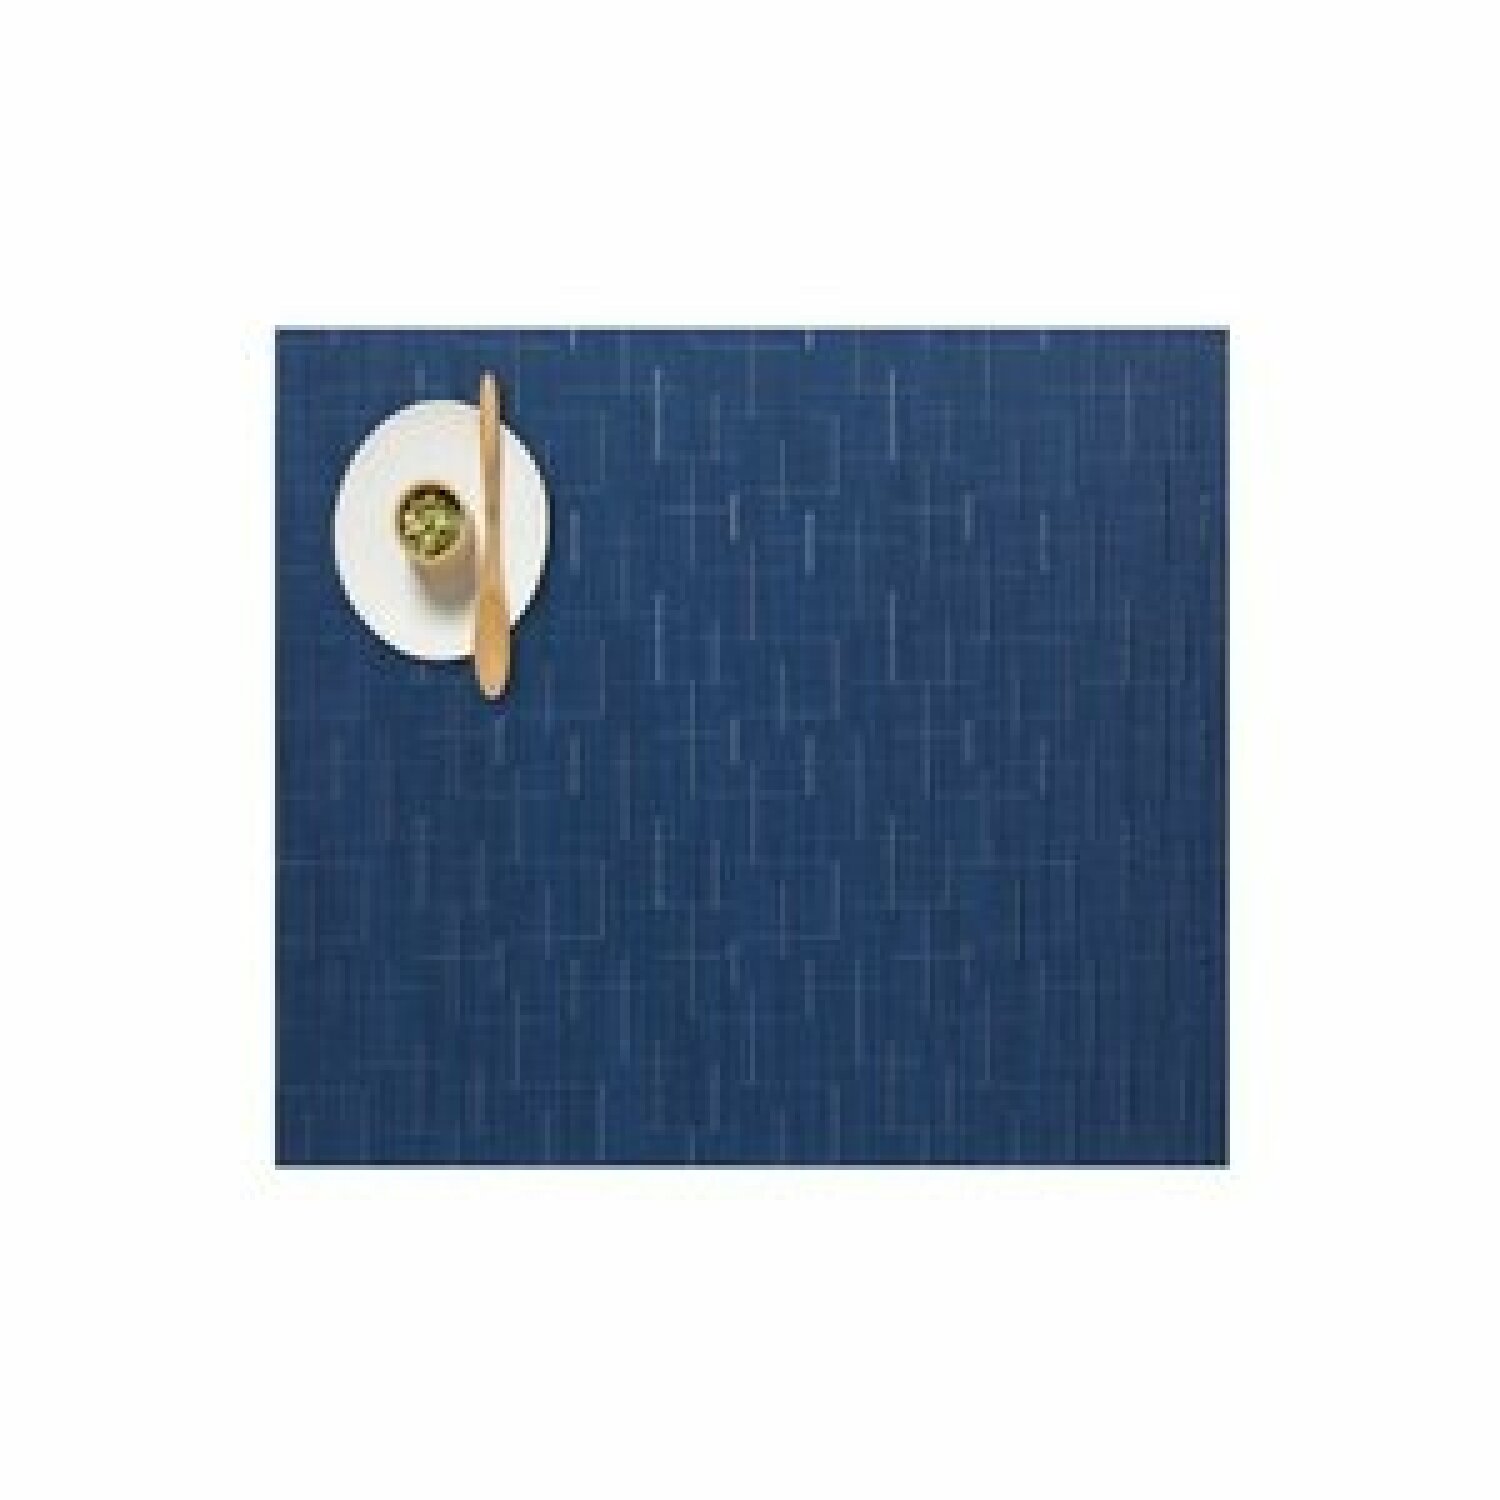 <a href="https://www.moderndigz.com/Chilewich Bamboo placemat" target="_blank" rel="noopener noreferrer">Chilewich Bamboo placemat</a>